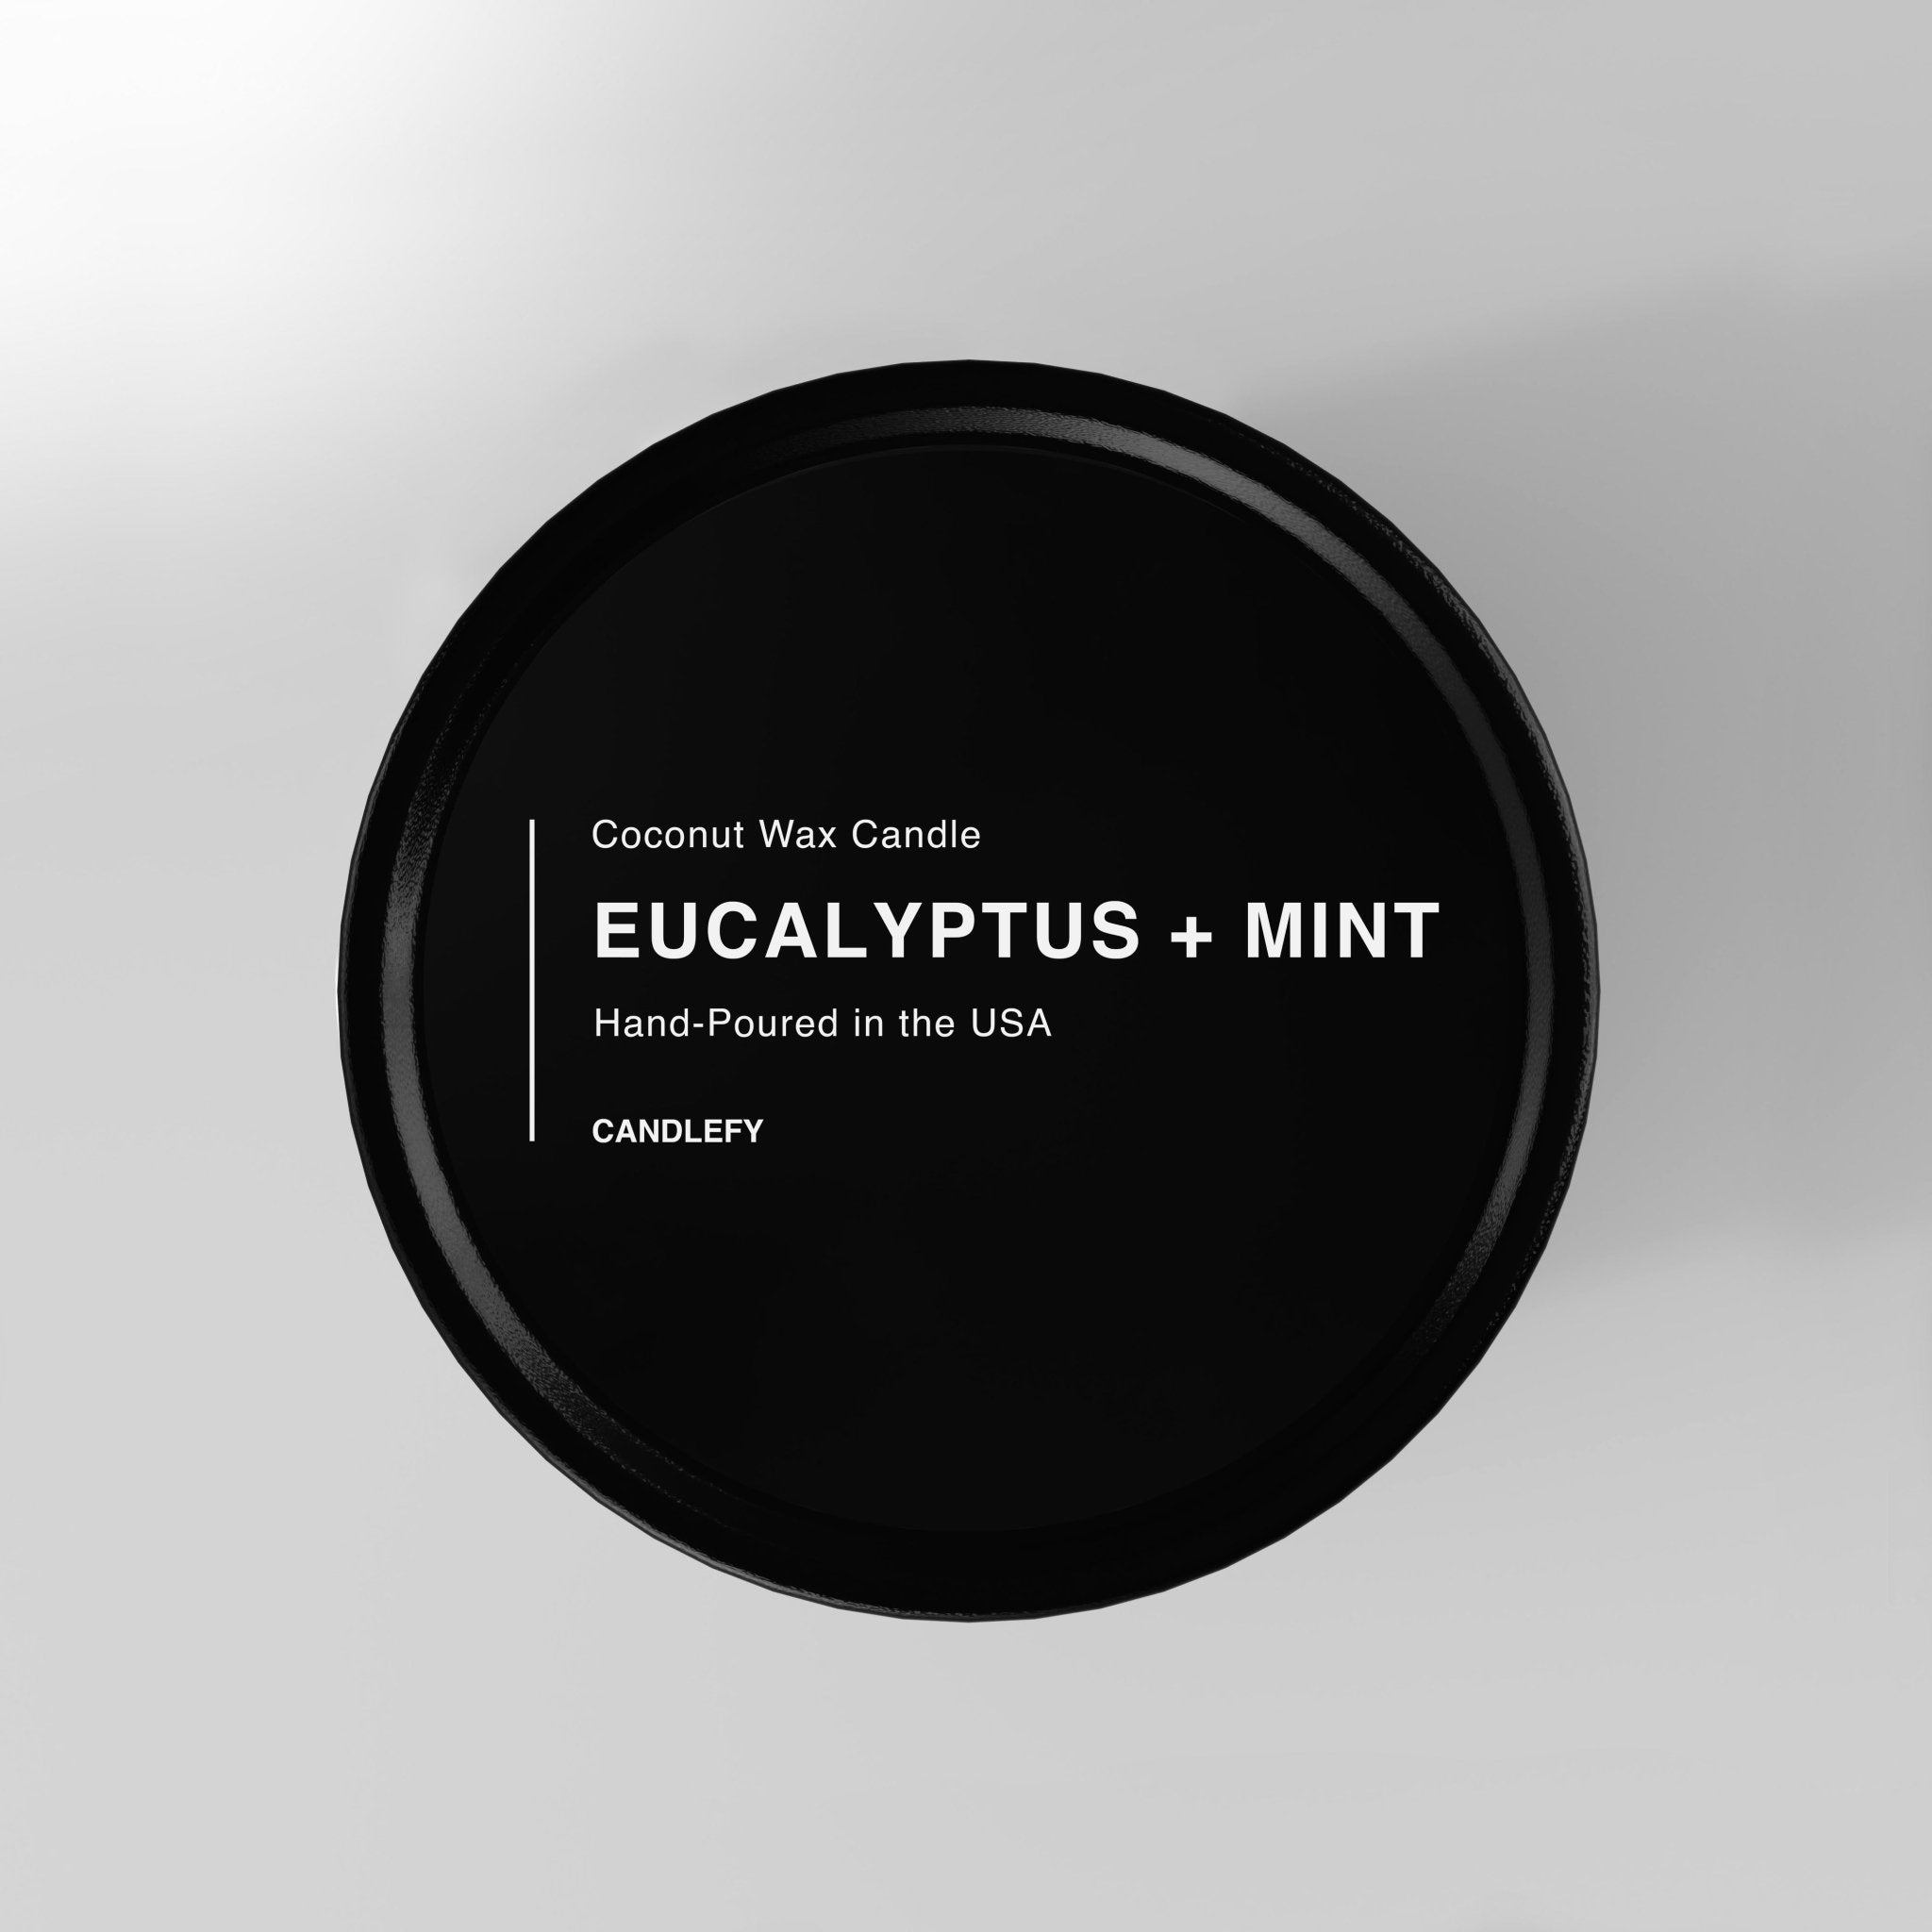 Eucalyptus + Mint Natural Wax Scented Candle in Black Travel Tin - Candlefy